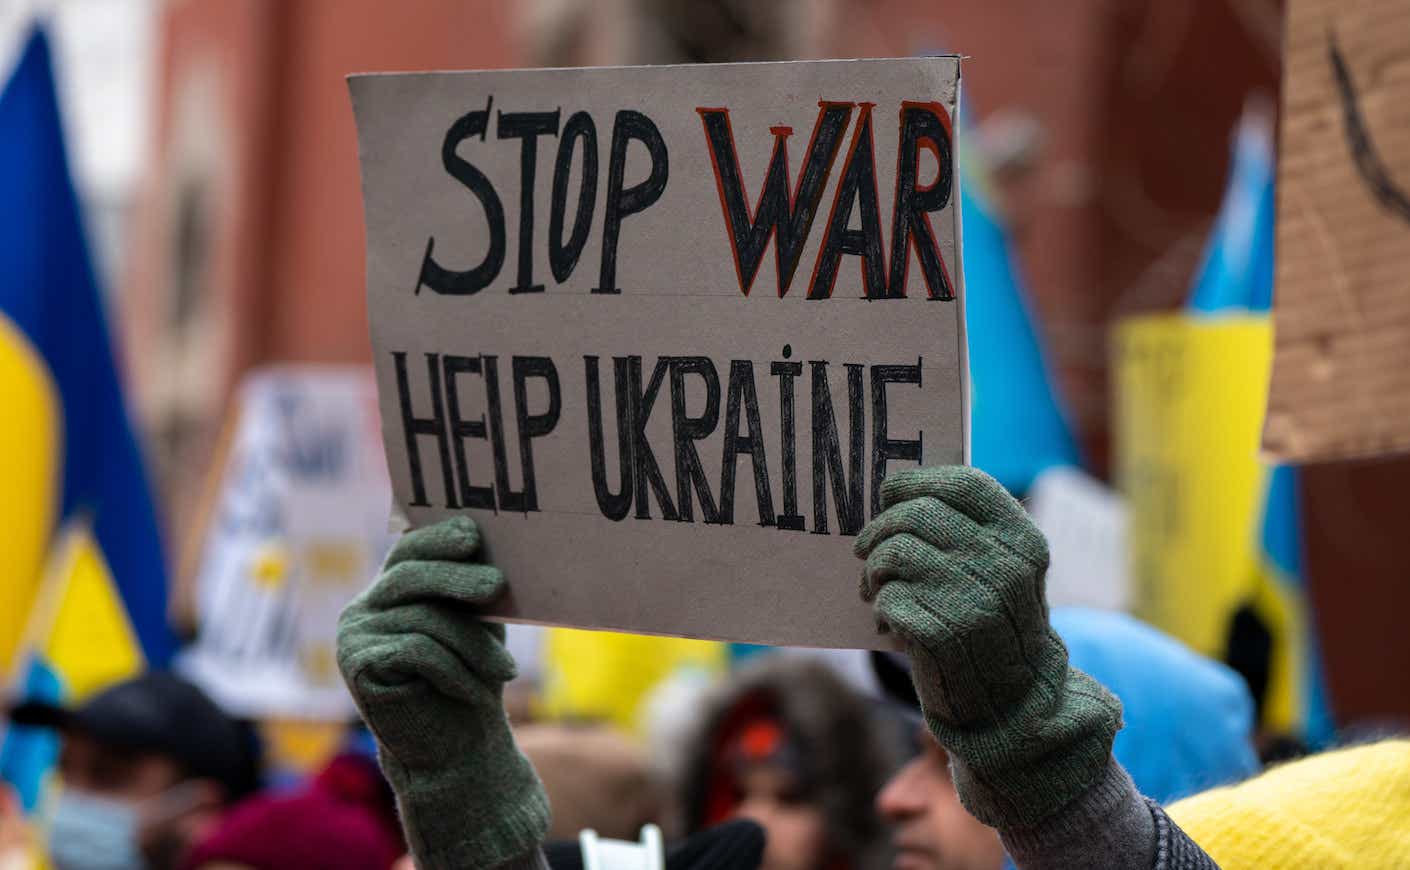 protestor holding up a sign that says "stop war help ukraine